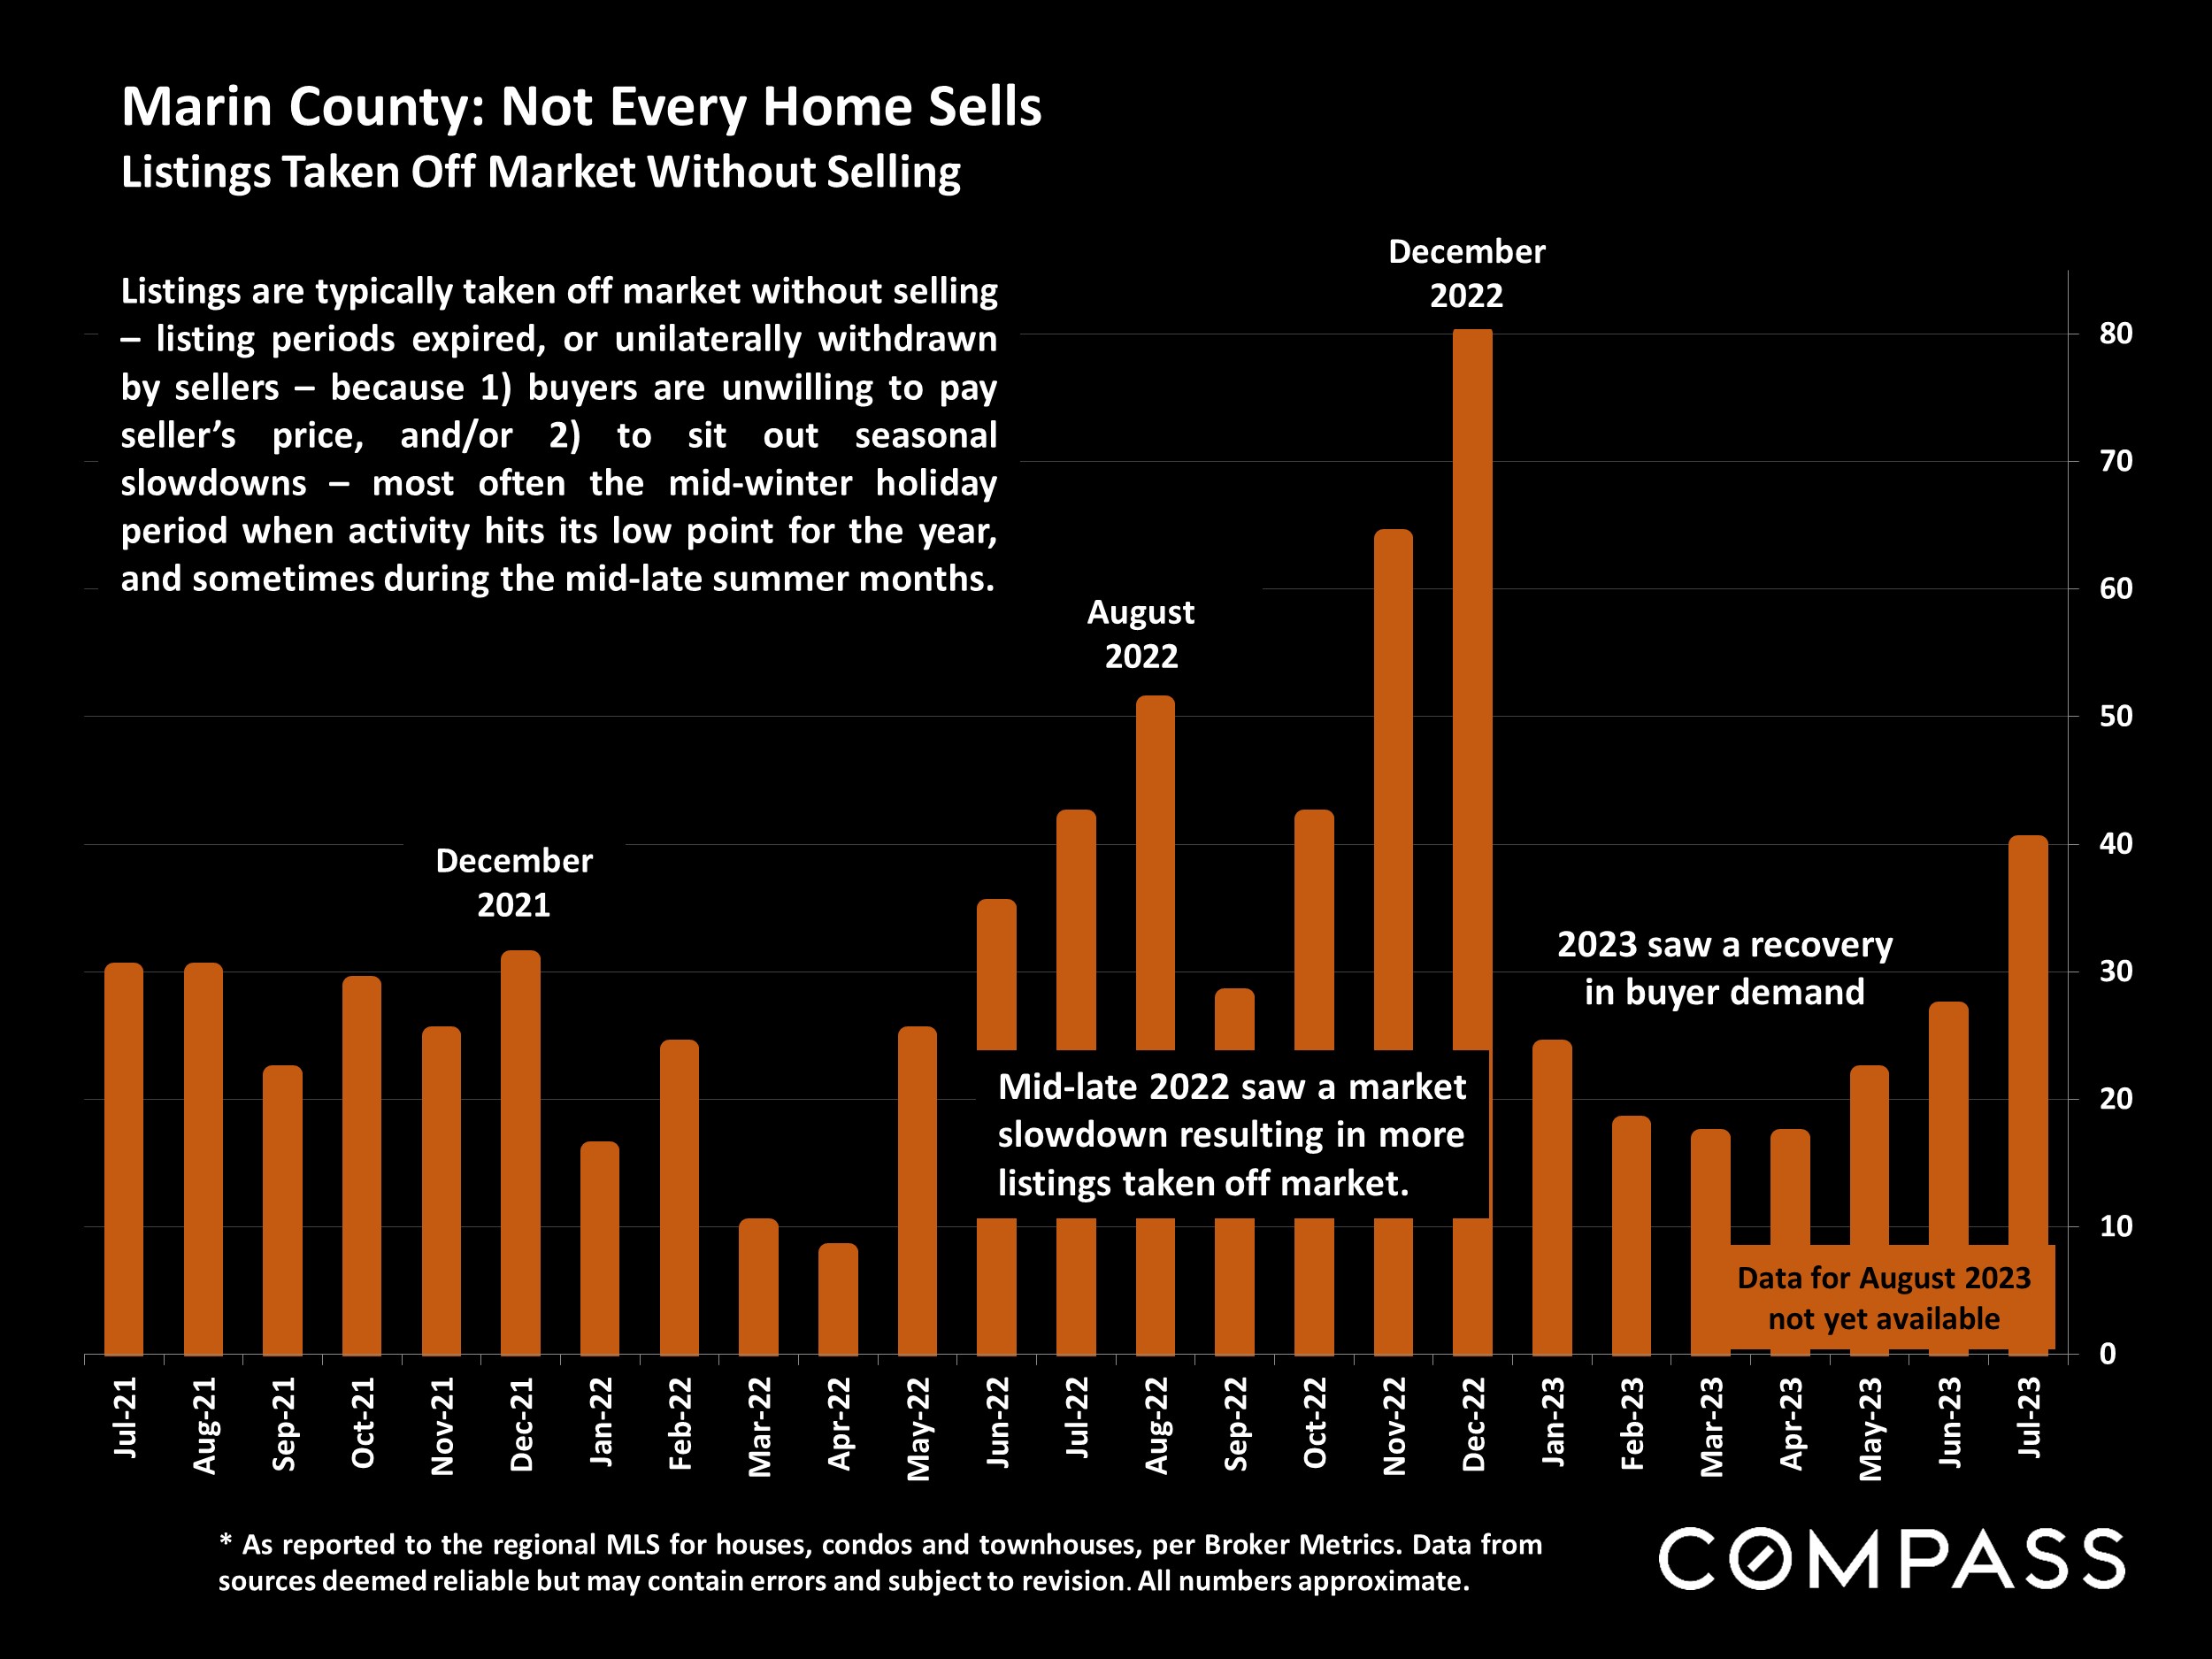 Marin County: Not Every Home Sells Listings Taken Off Market Without Selling